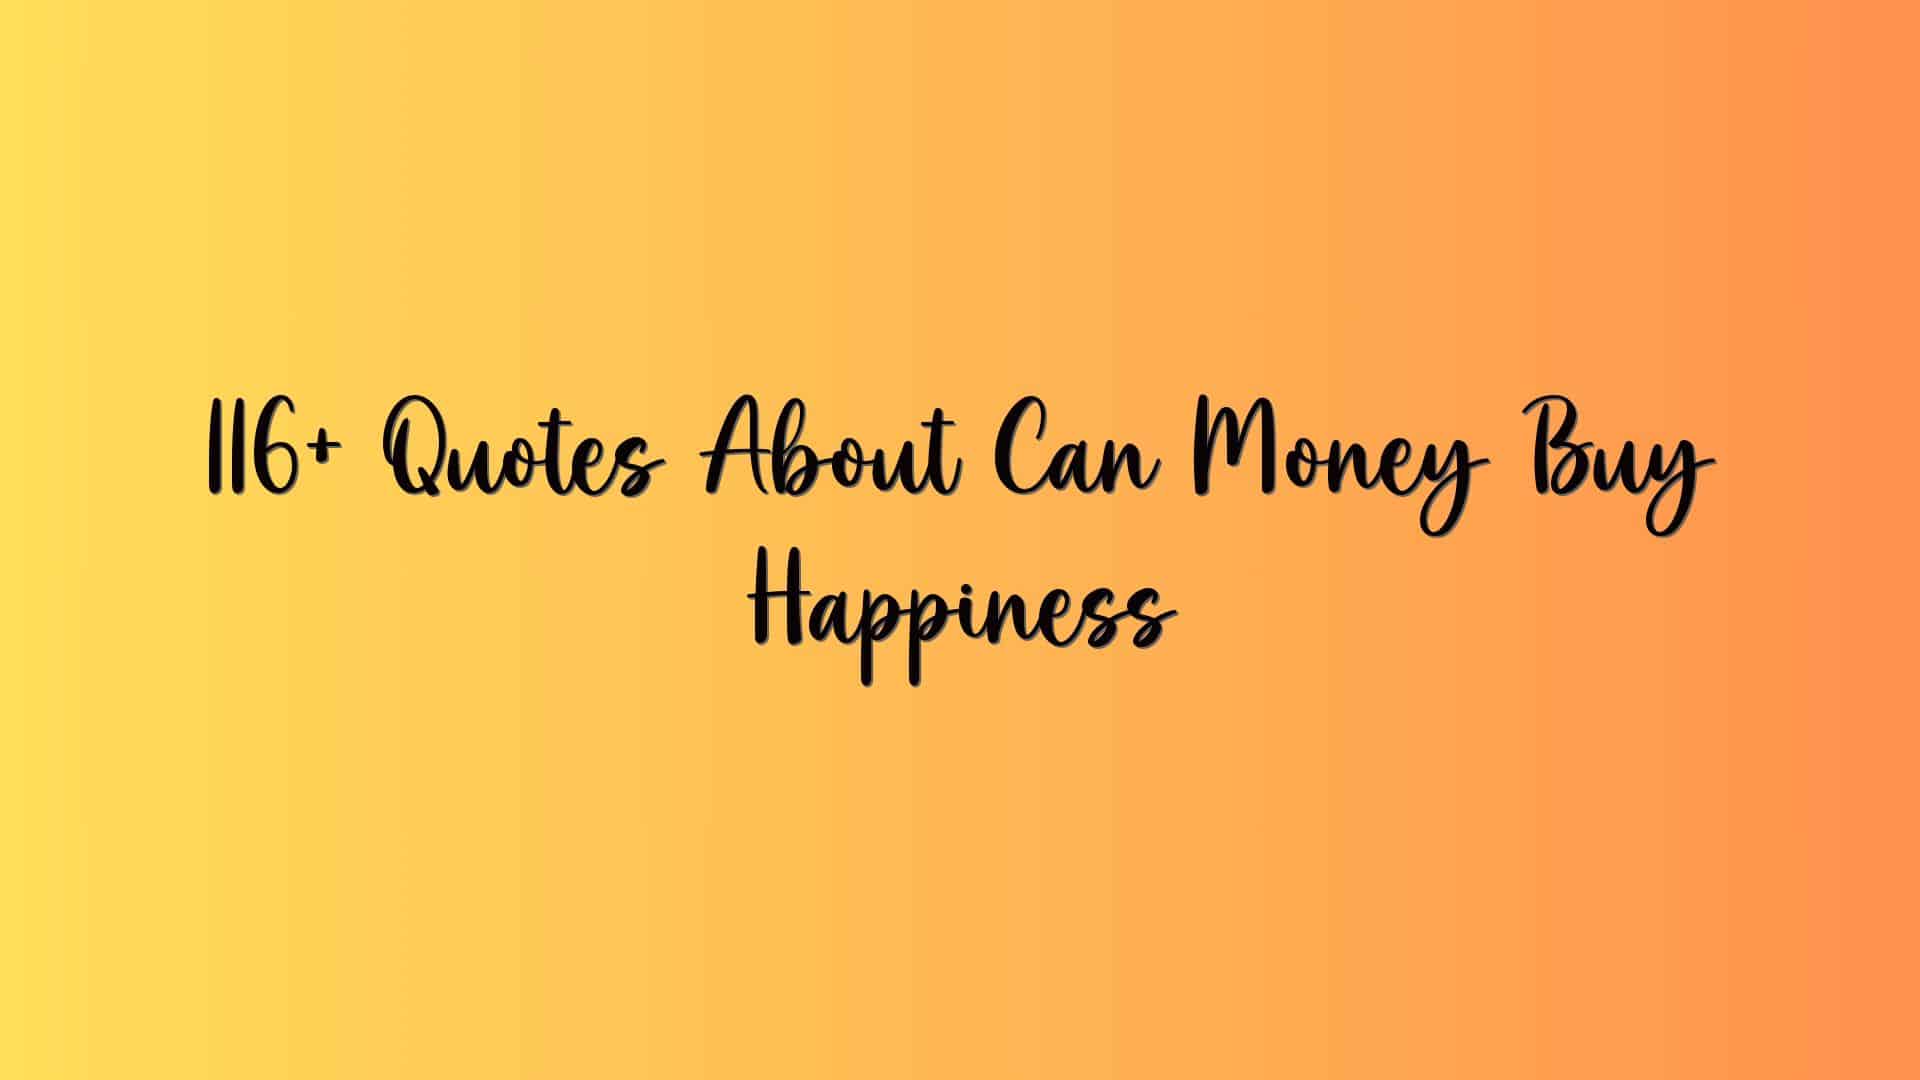 116+ Quotes About Can Money Buy Happiness